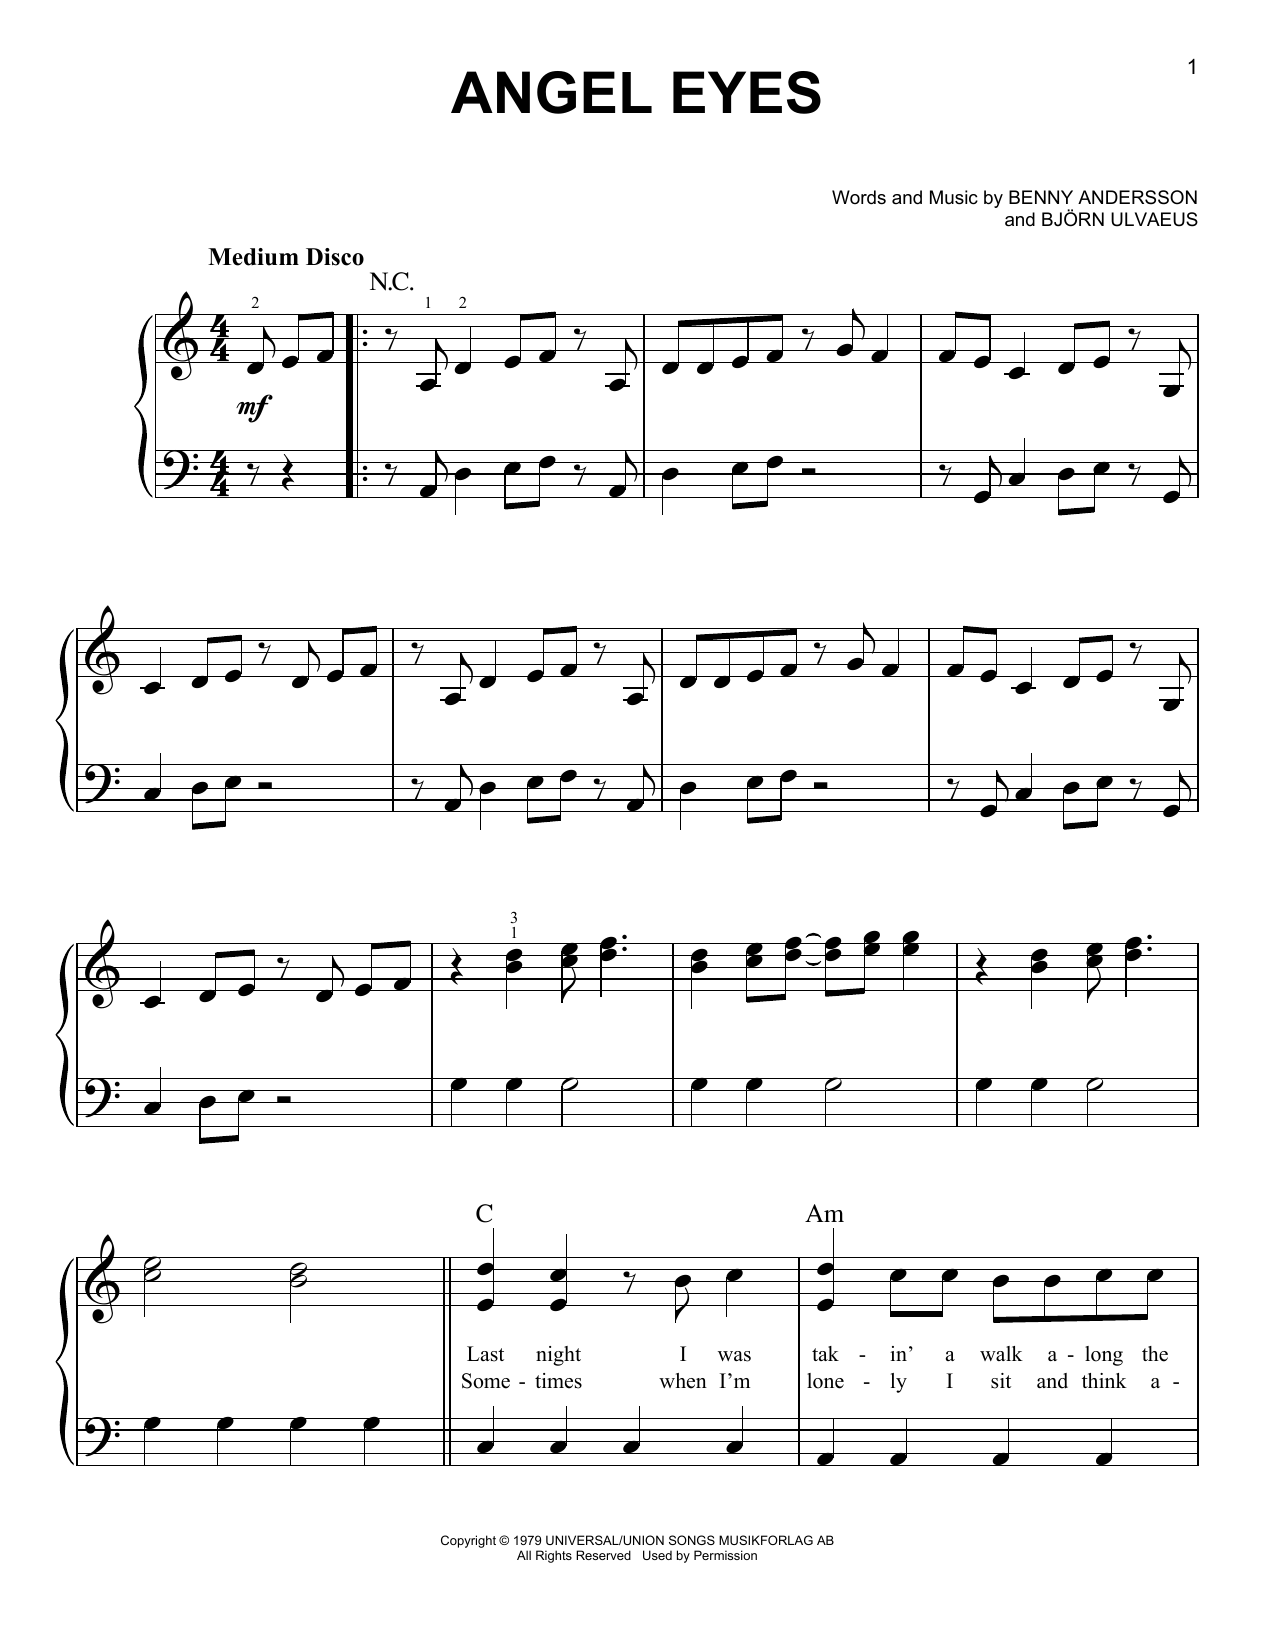 ABBA Angeleyes (from Mamma Mia! Here We Go Again) sheet music notes printable PDF score